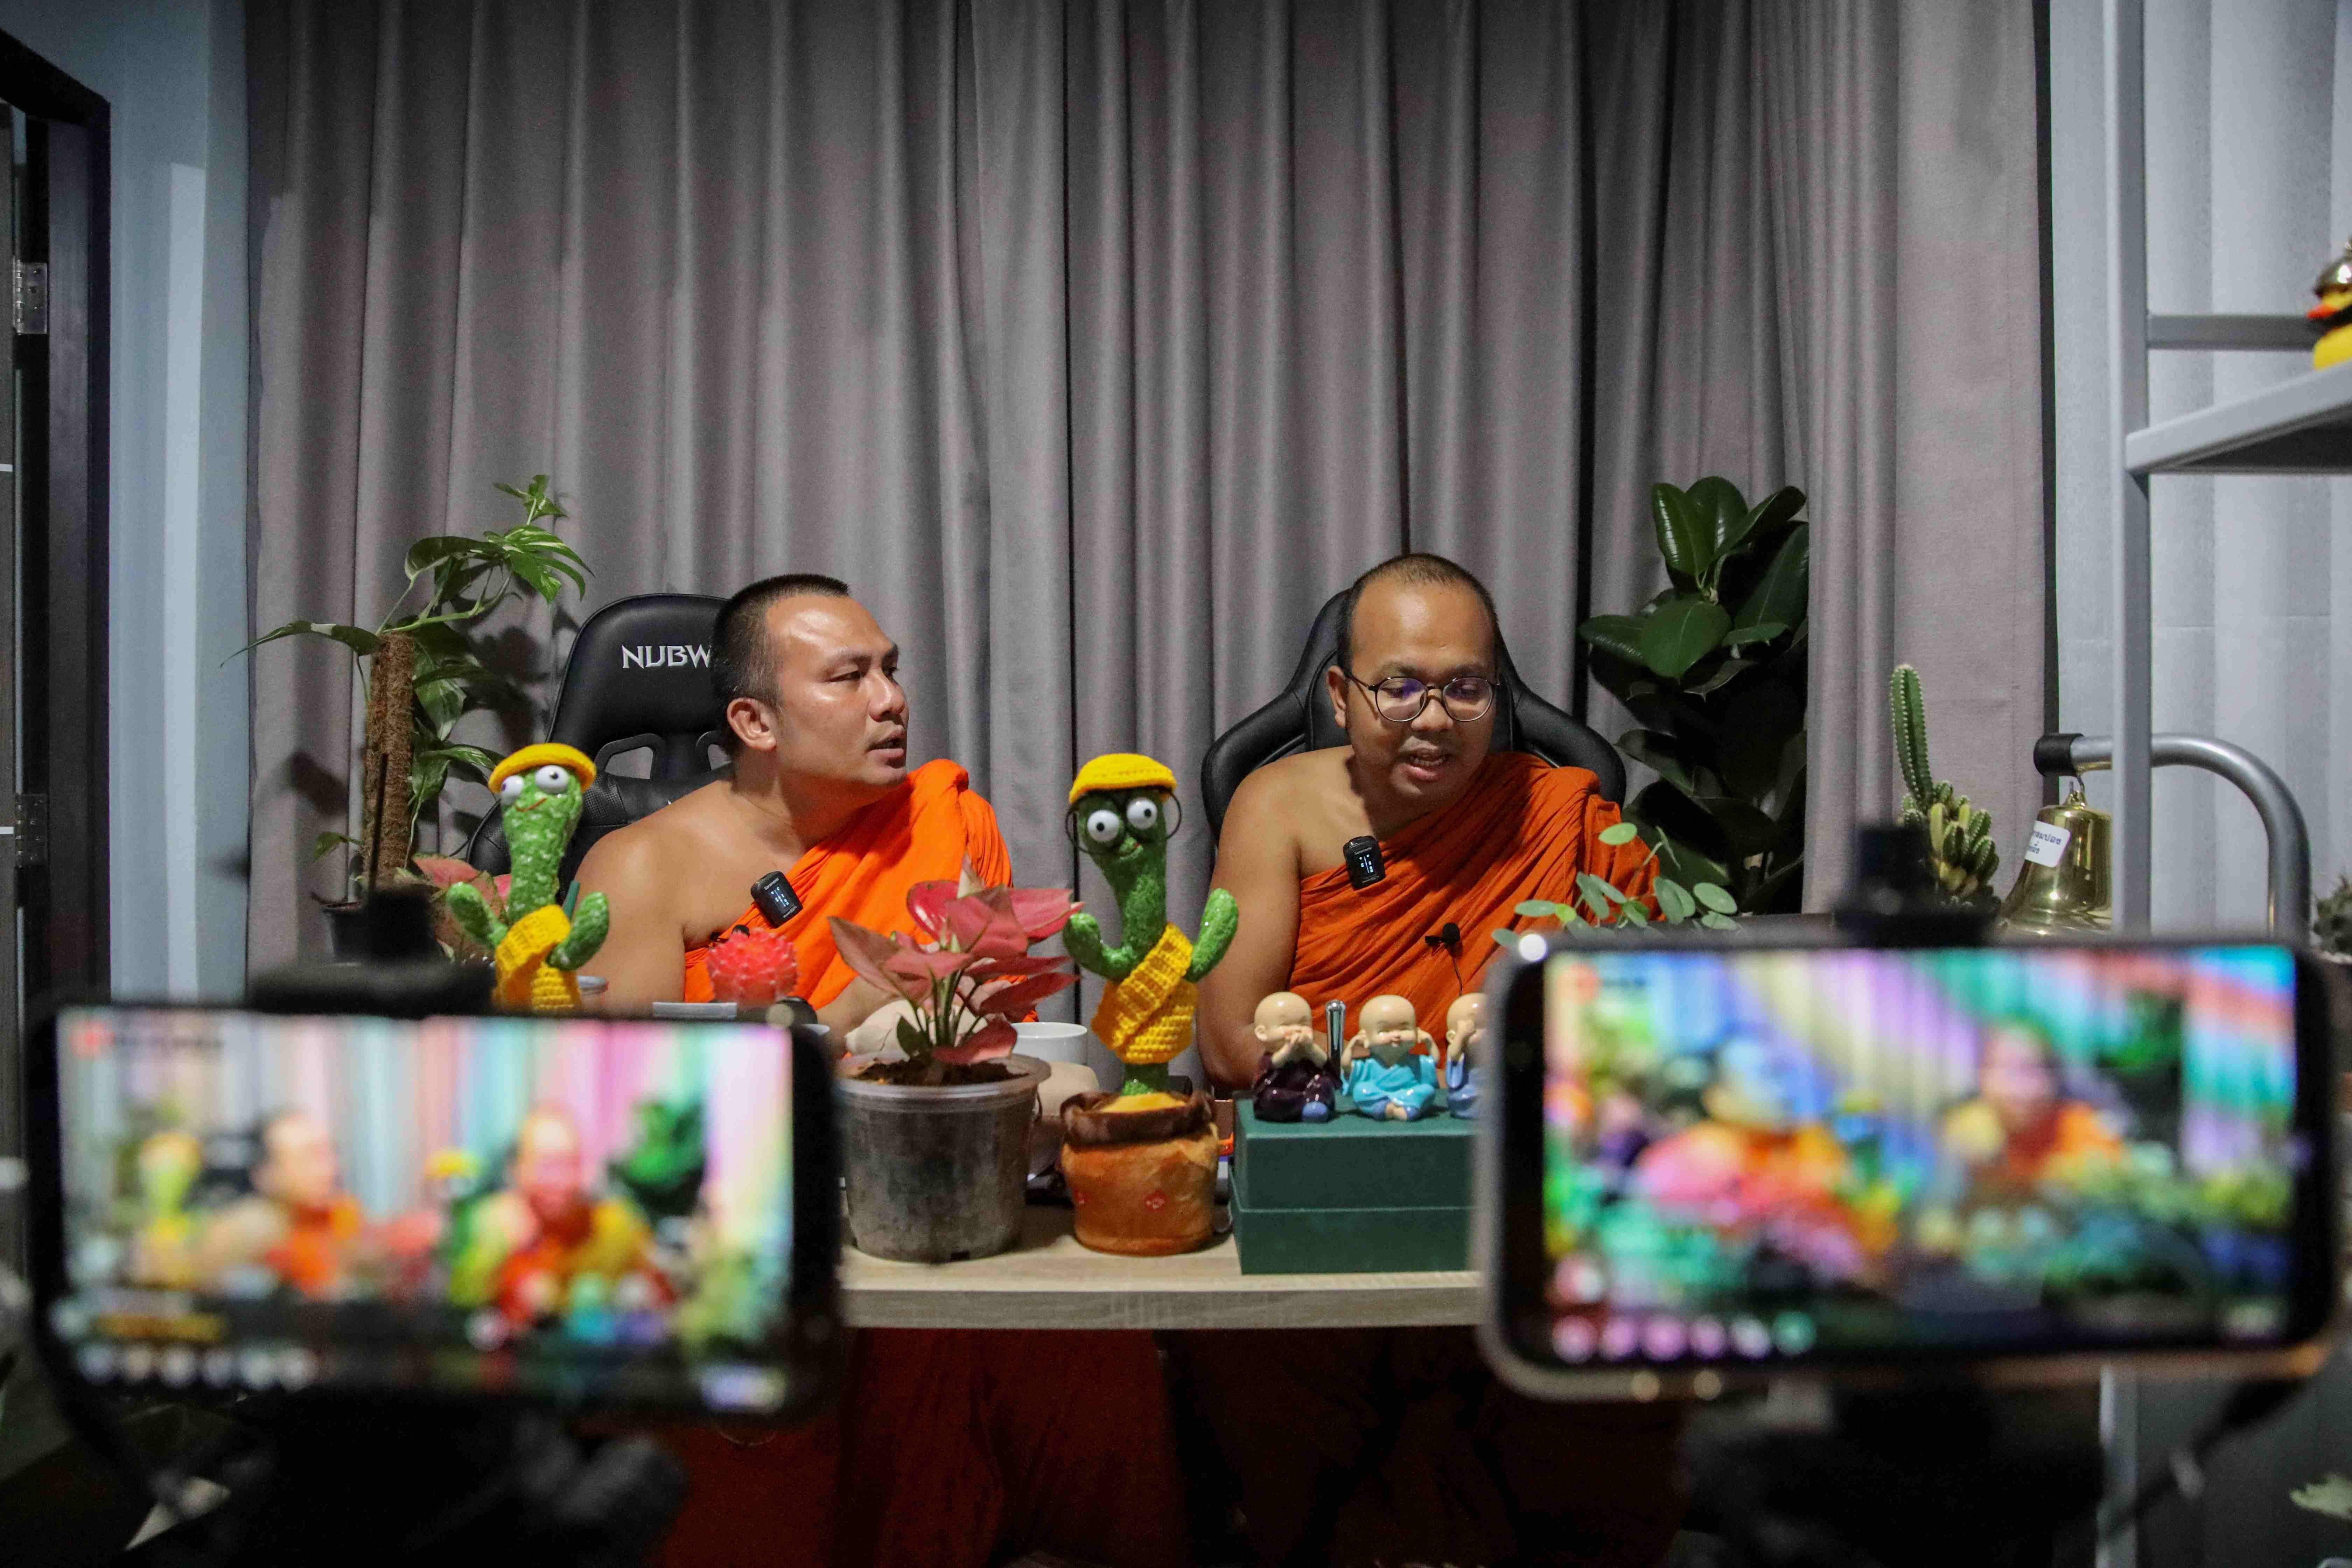 Thai monks’ livestream mixes Buddhism and jokes but not all are laughing